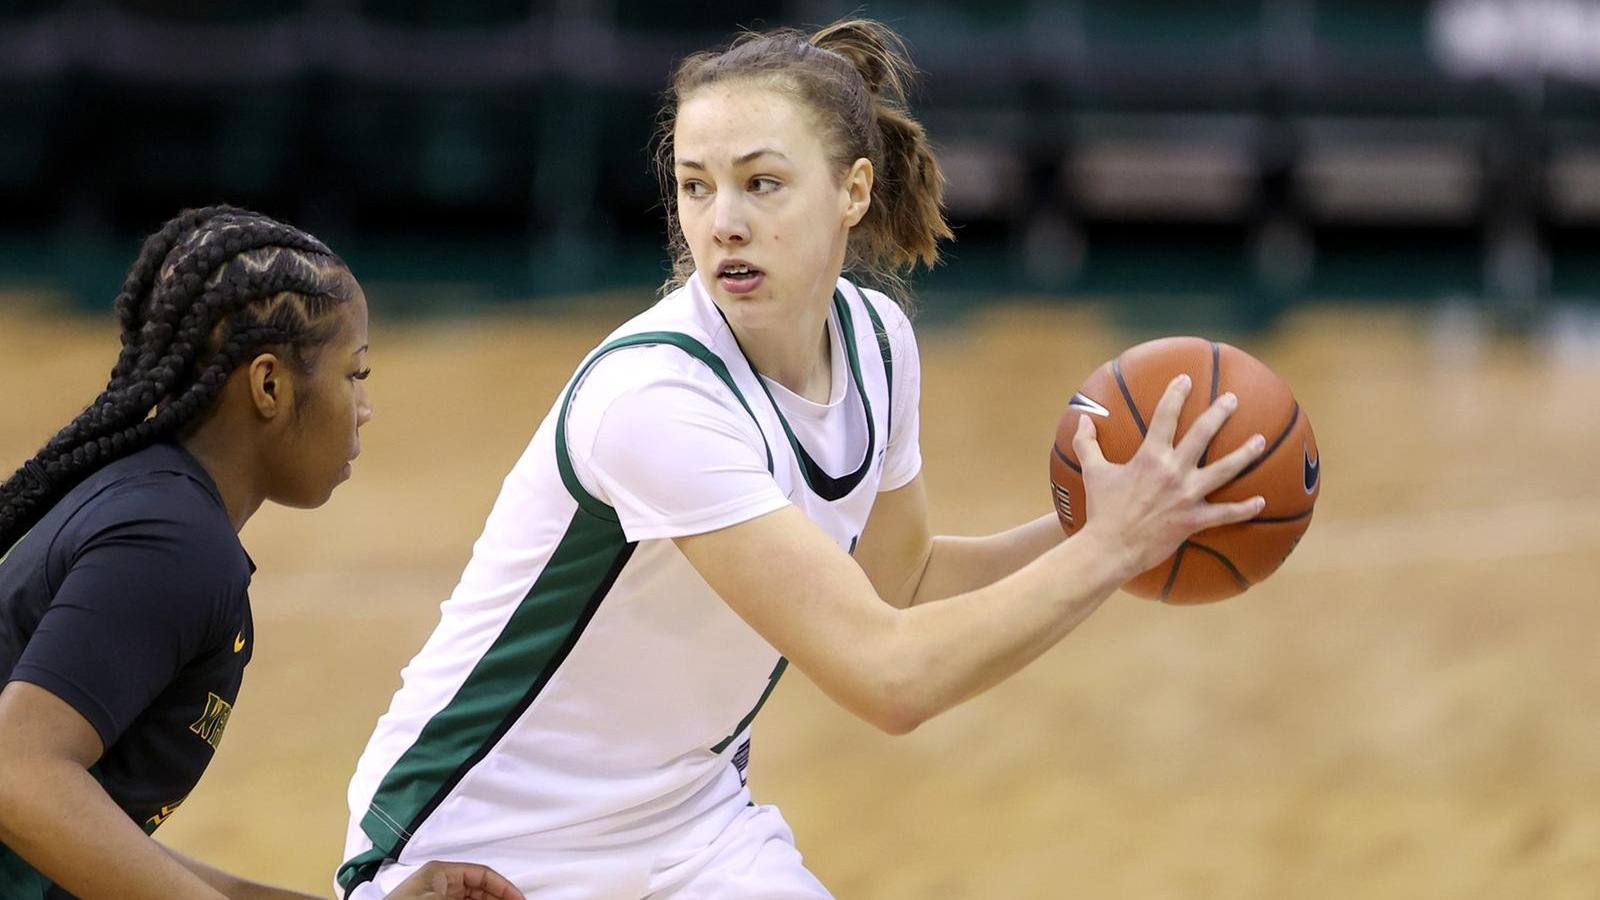 Women’s Basketball Picks Up Fifth Straight Win With 68-45 Victory Over Purdue Fort Wayne